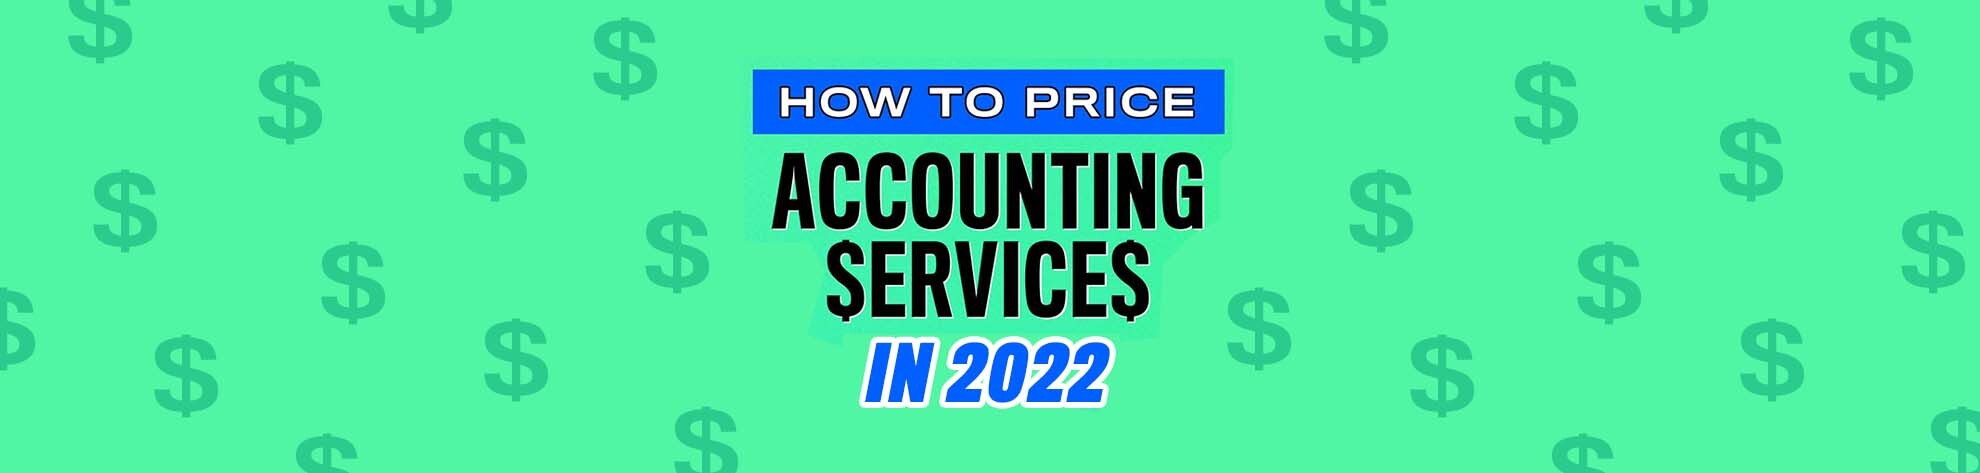 how to price accounting services in 2022